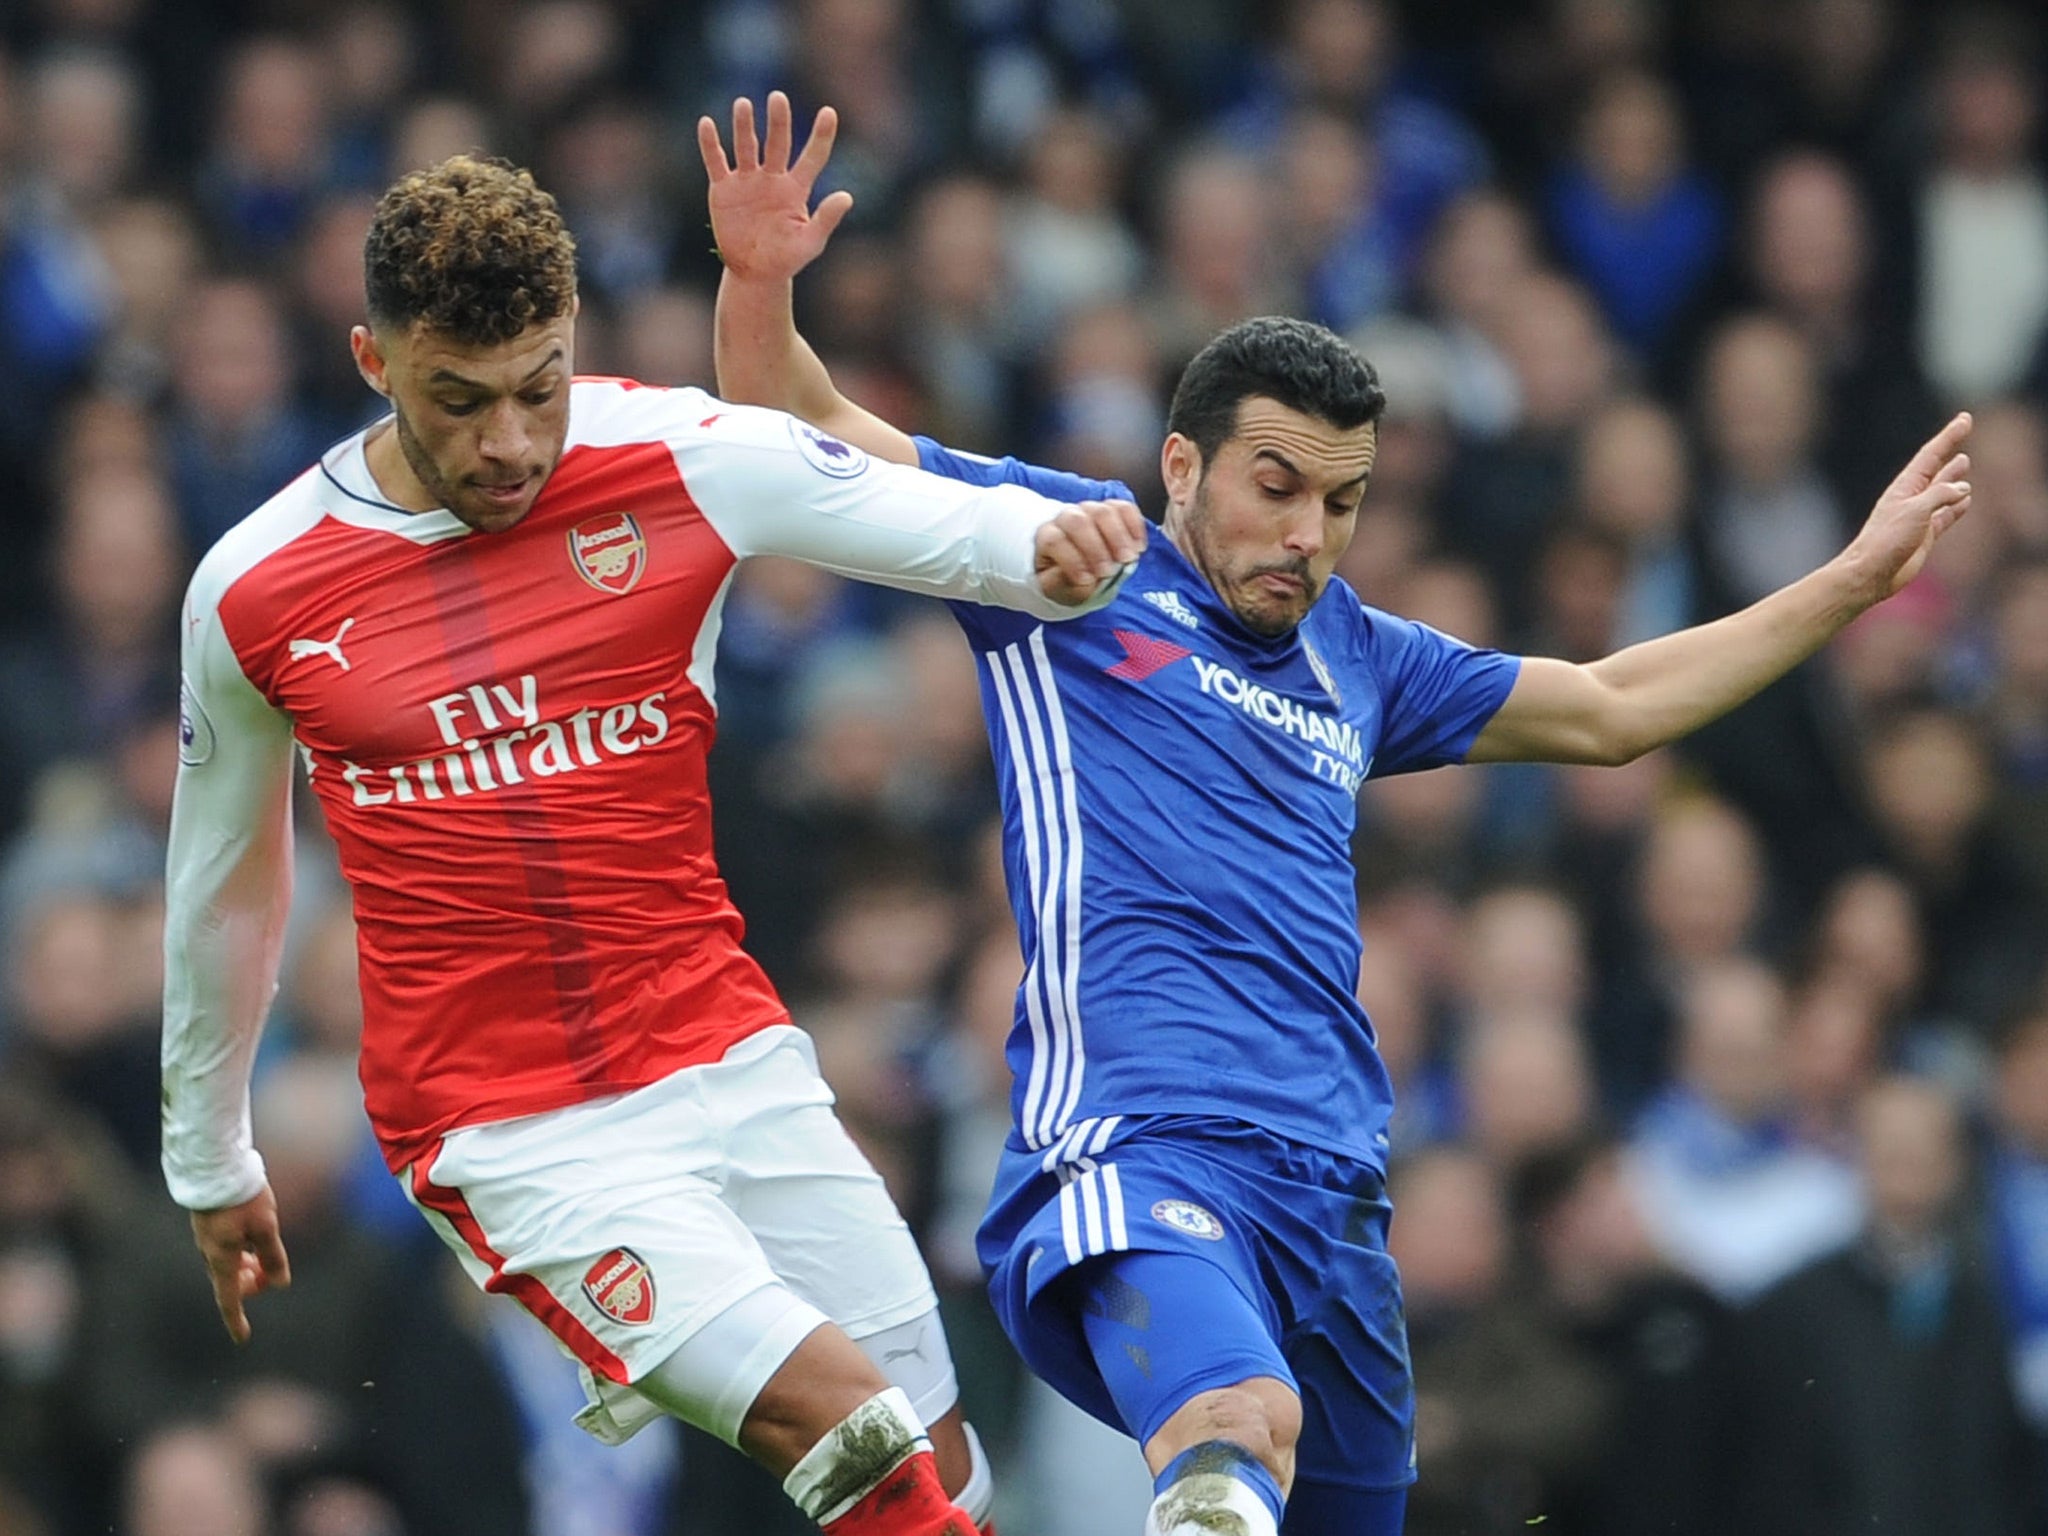 Arsenal beat Chelsea at home in the league this season but went down to a defeat at Stamford Bridge